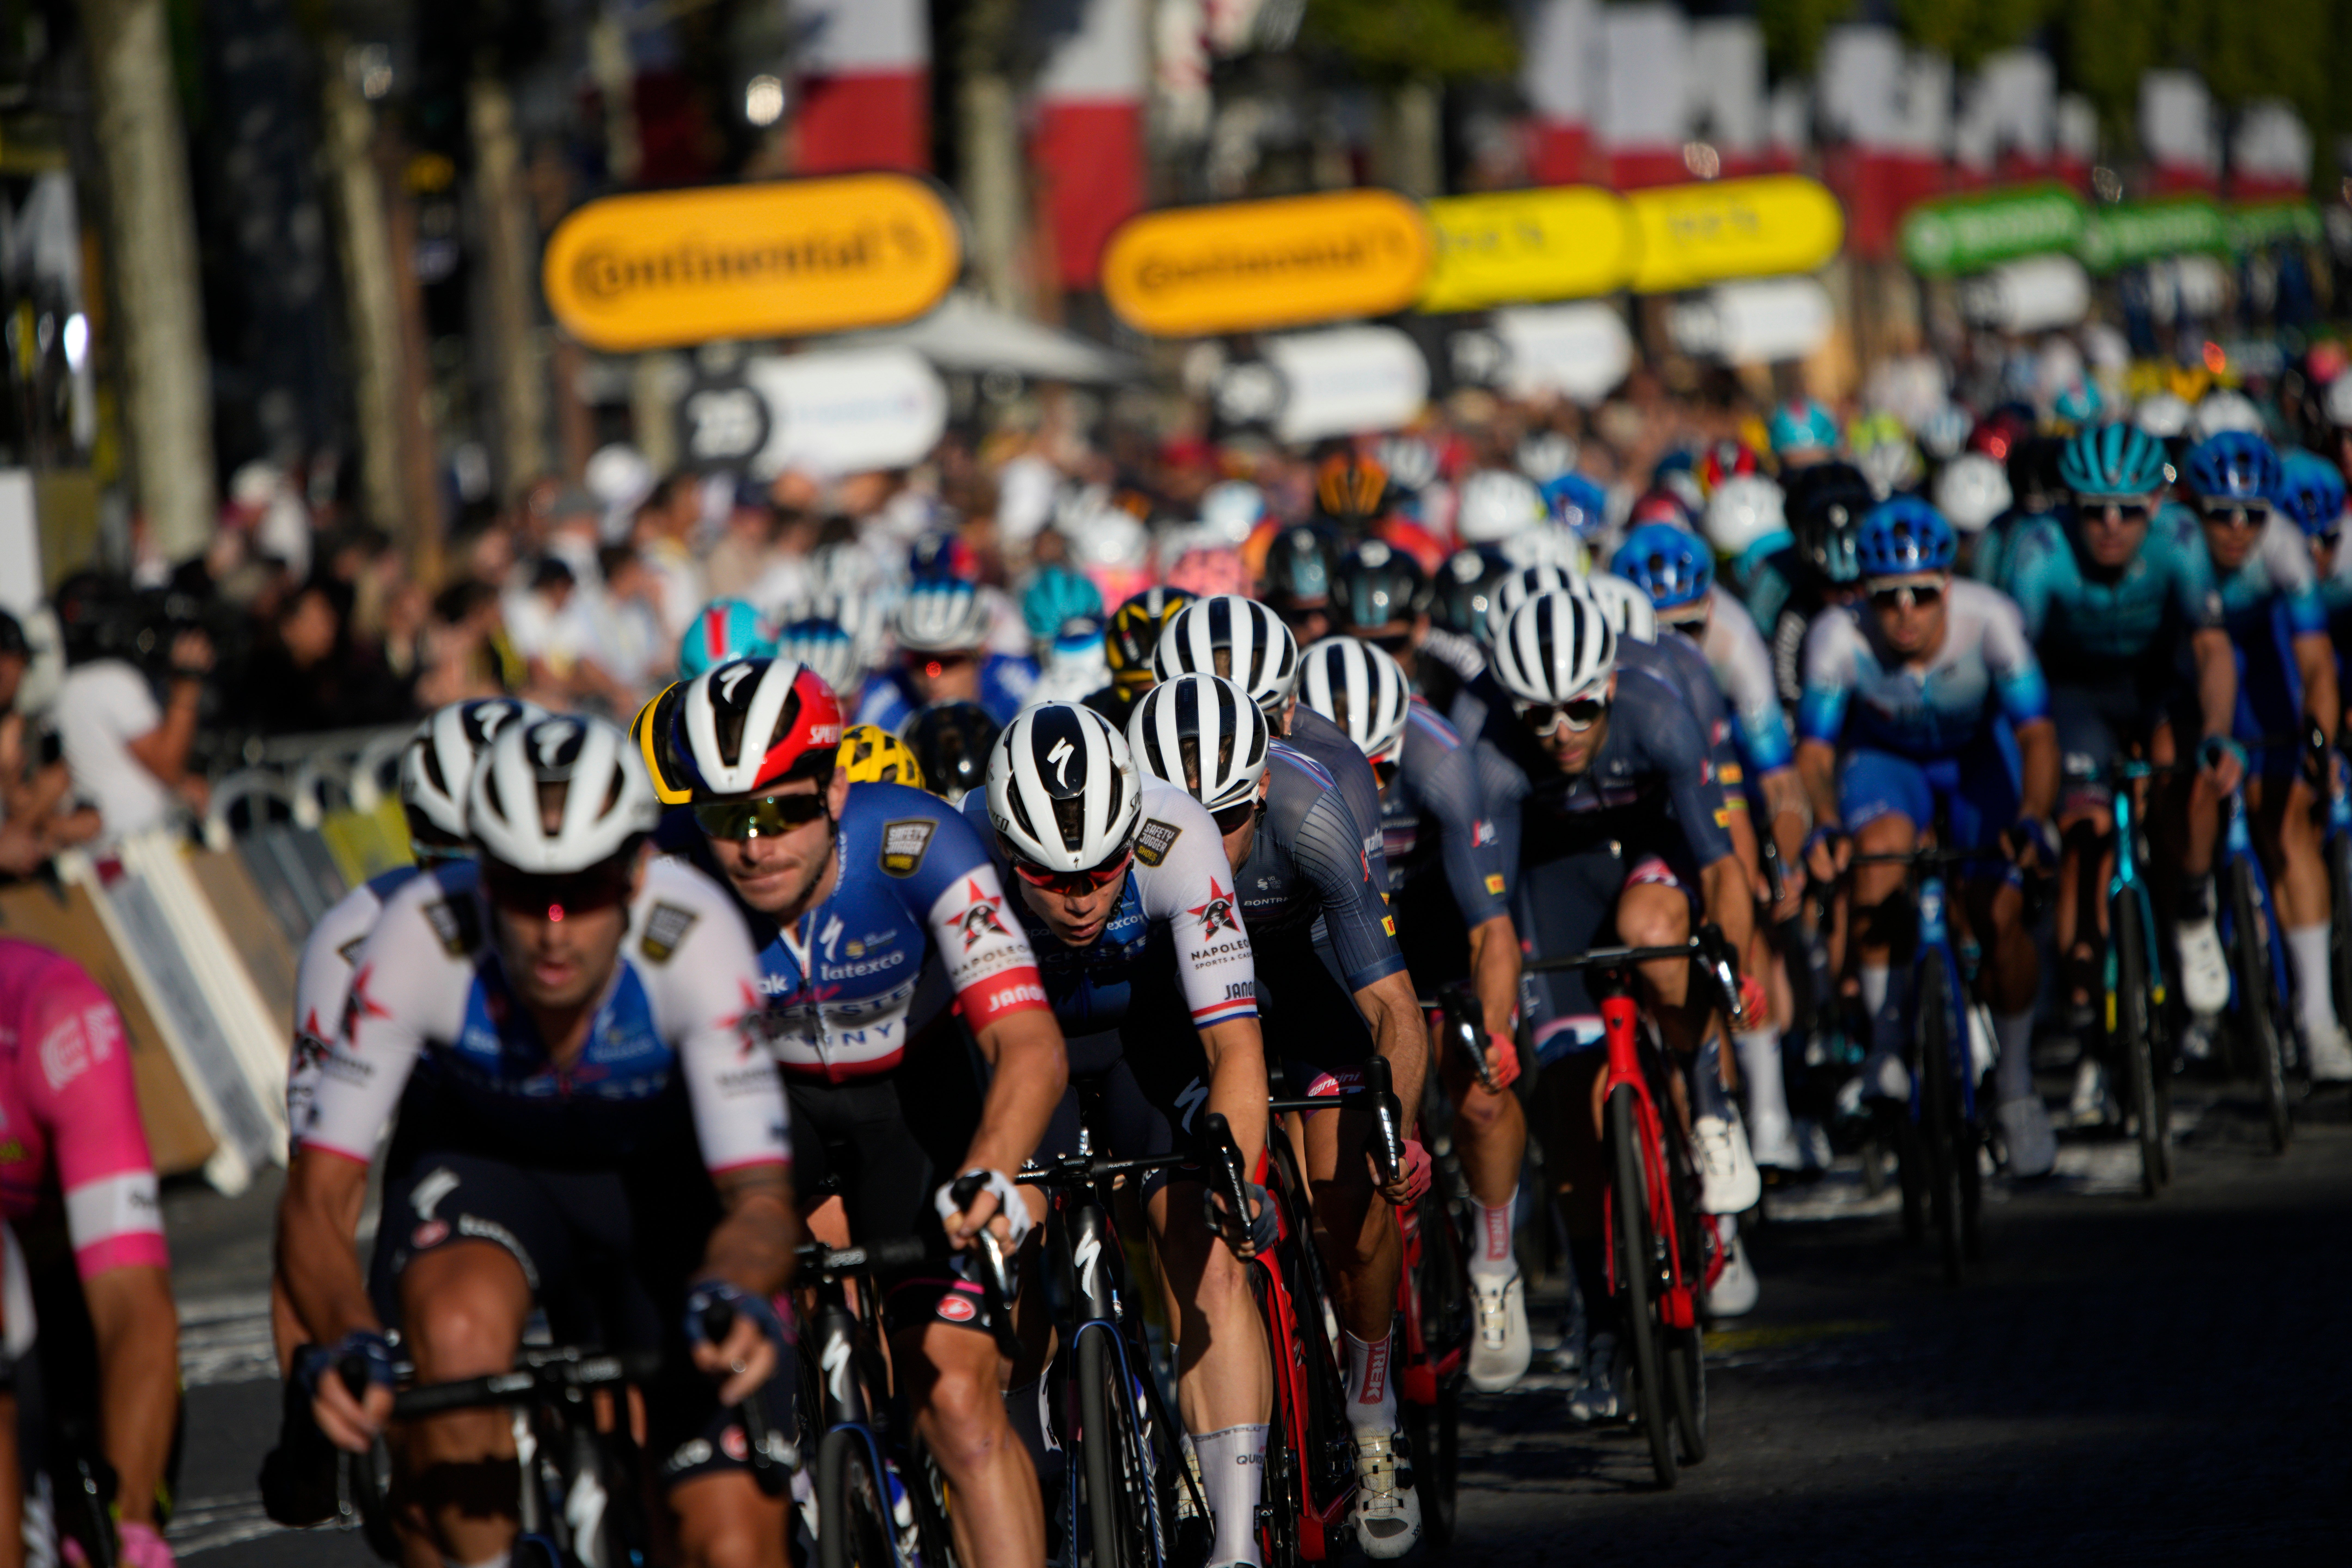 The pack rides during the twenty-first stage of the Tour de France